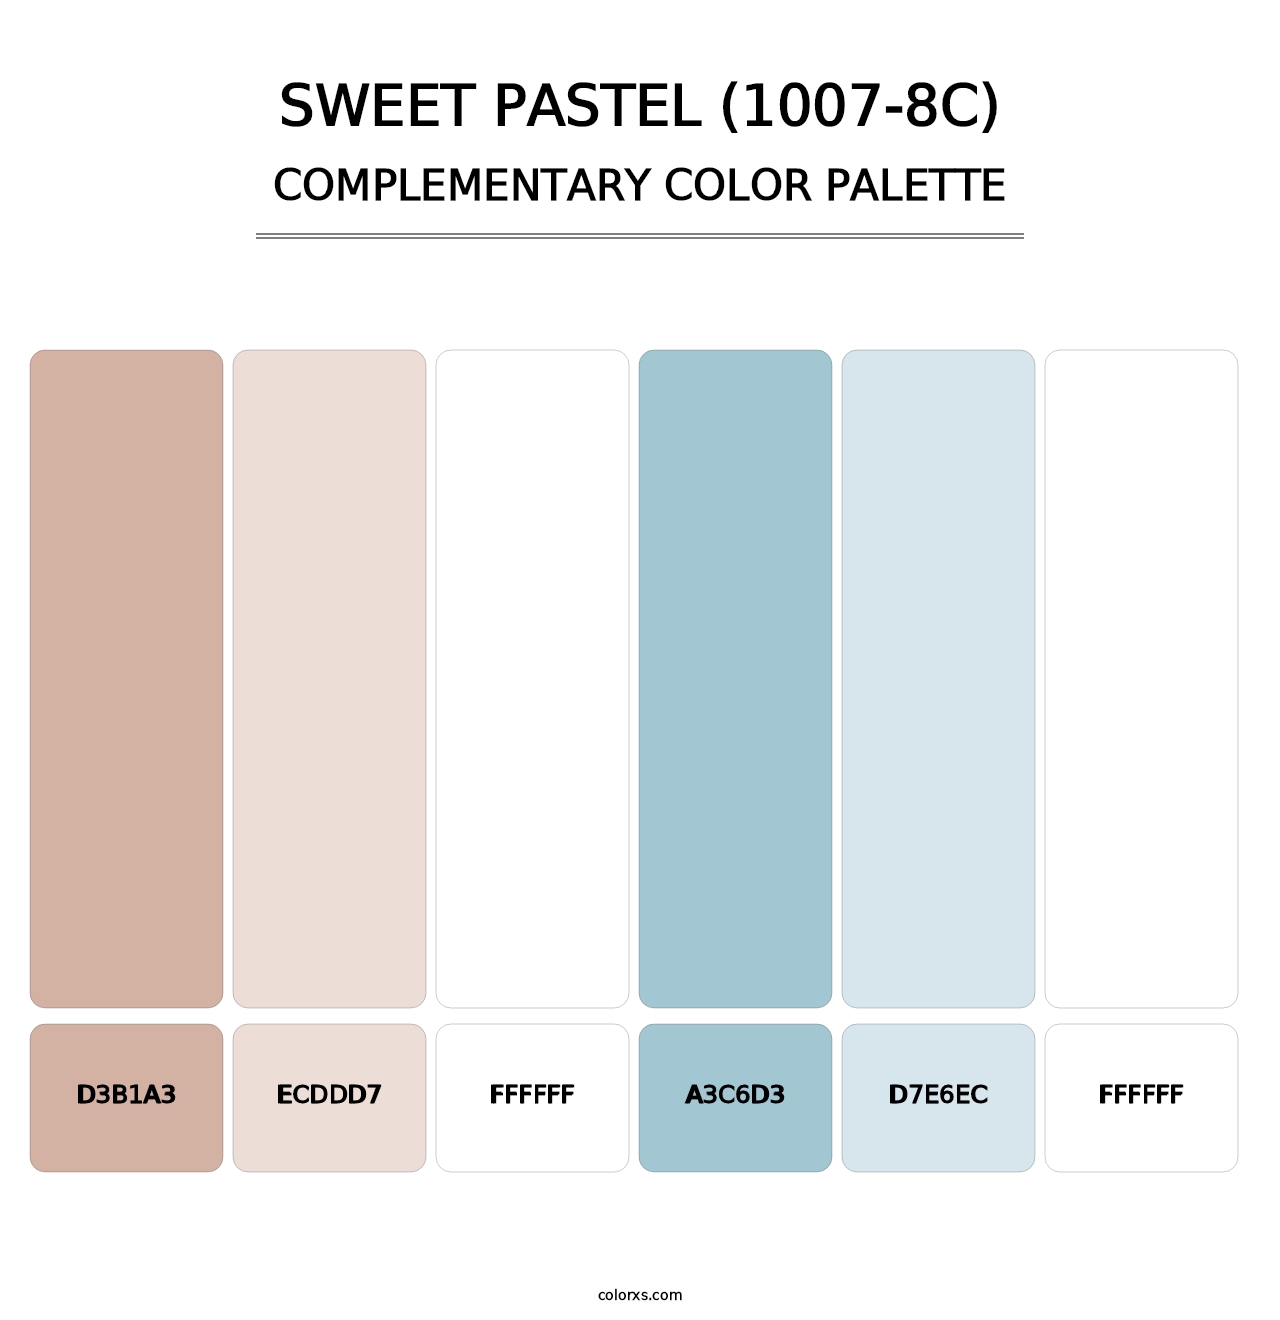 Sweet Pastel (1007-8C) - Complementary Color Palette